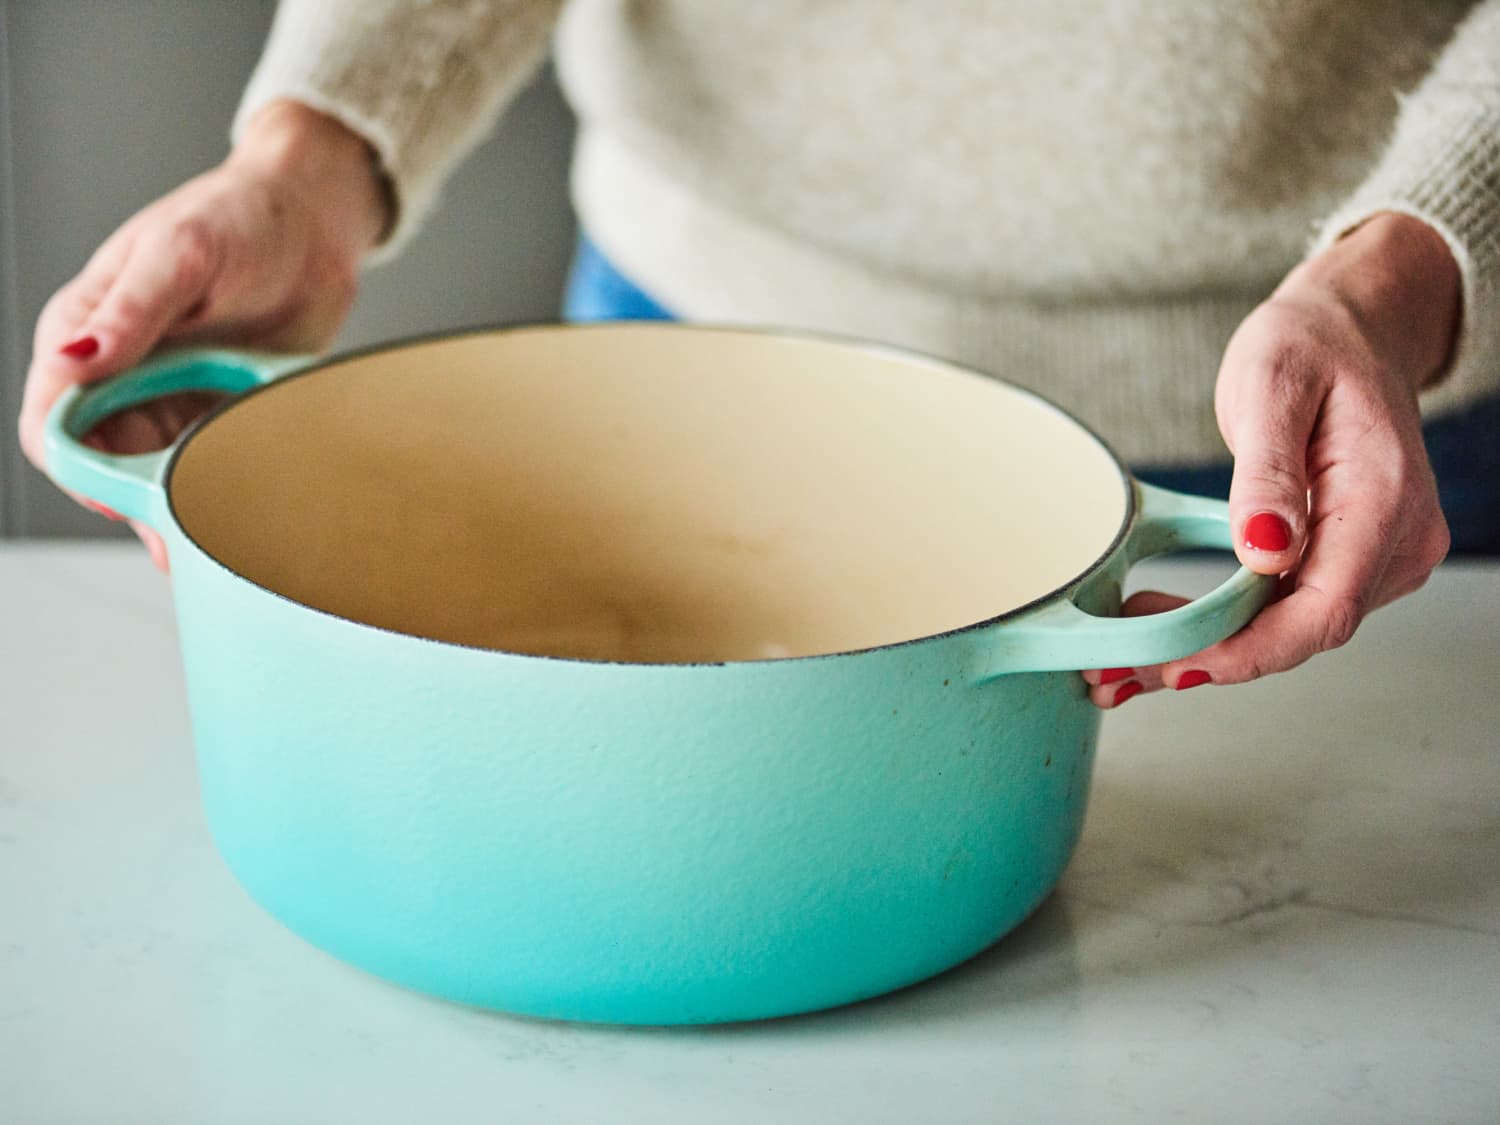 https://cdn.apartmenttherapy.info/image/upload/f_jpg,q_auto:eco,c_fill,g_auto,w_1500,ar_4:3/k%2FPhoto%2FLifestyle%2F2020-01-Le-Creuset-Reddit-Tip%2FGet-your-Le-Creuset-Looking-Brand-New-With-This-Clever-Tip-from-Reddit_016